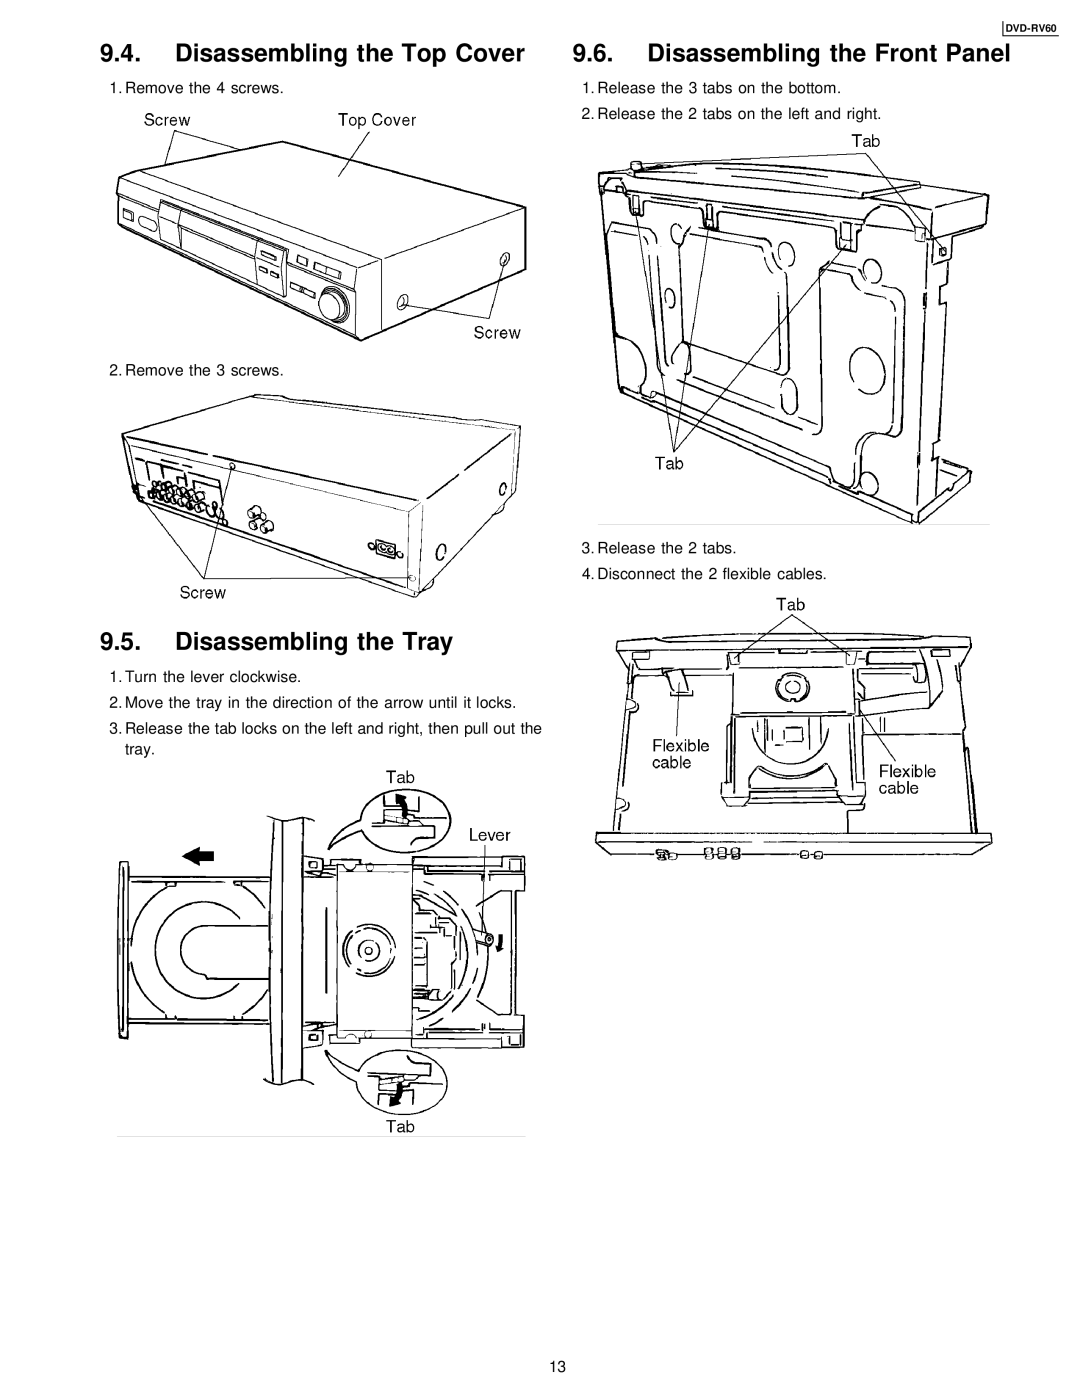 Panasonic DVDRV60 specifications Disassembling the Top Cover, Disassembling the Tray, Disassembling the Front Panel 